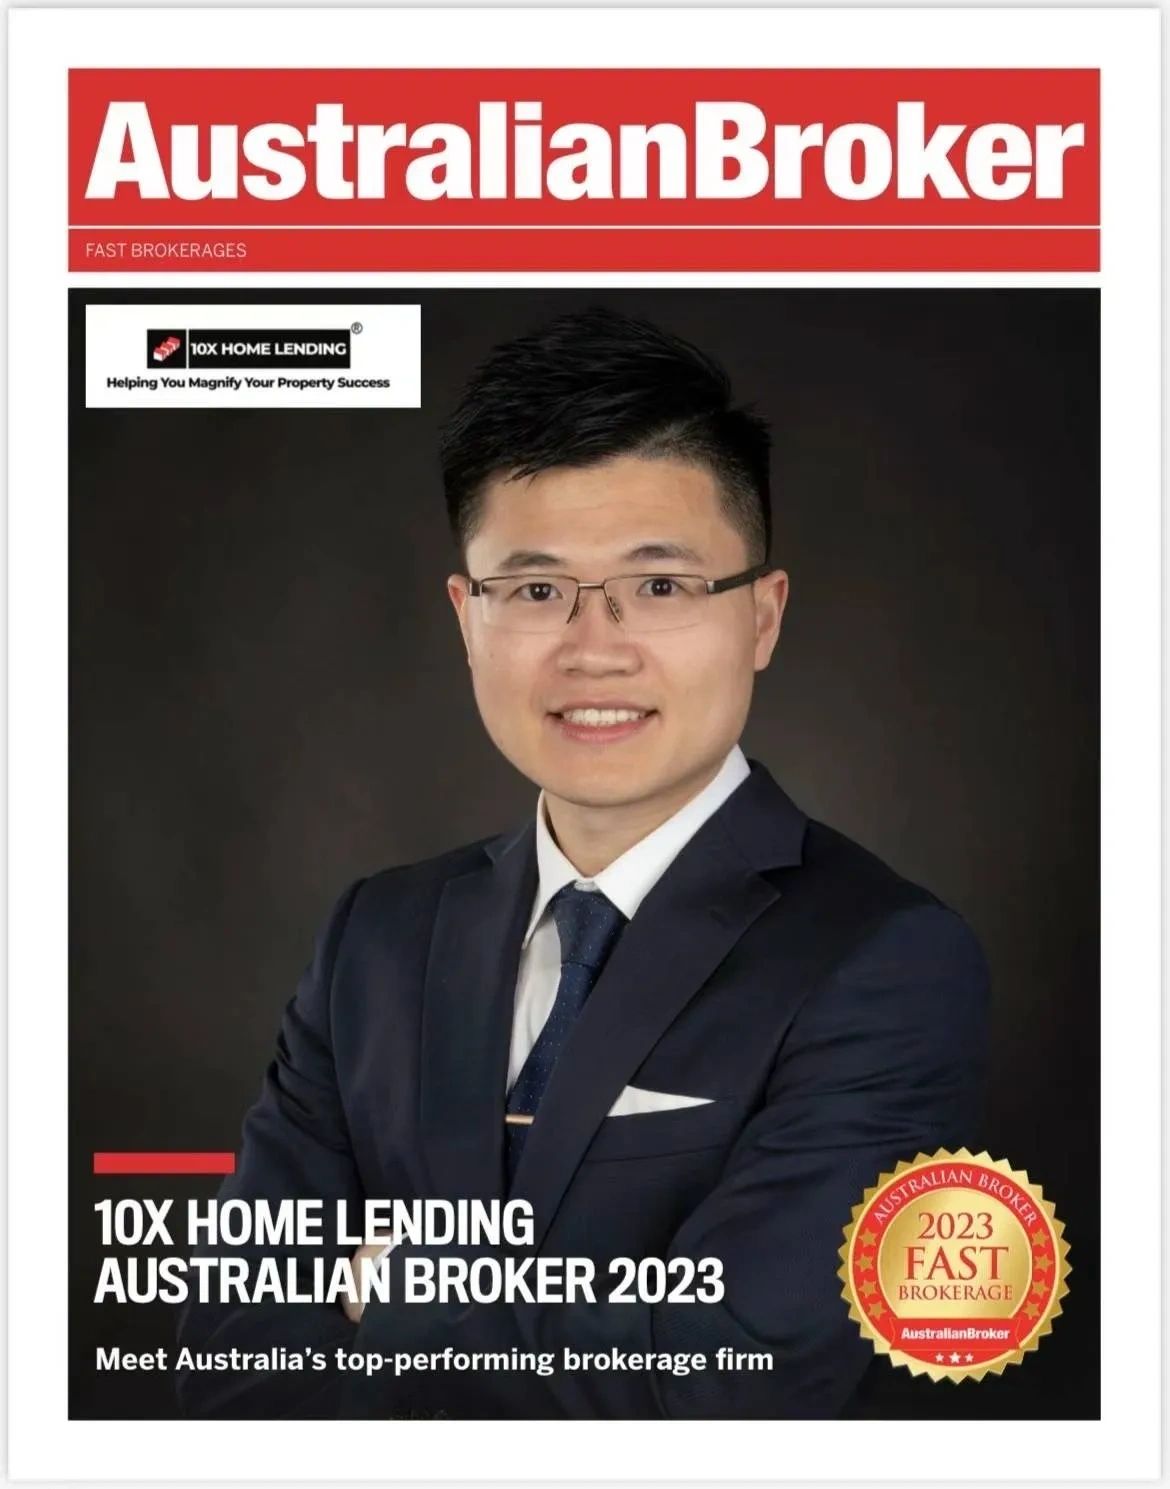 10X Home Lending - Has Been Nominated as one of Fast Brokerage in 2023 by AustralianBroker.